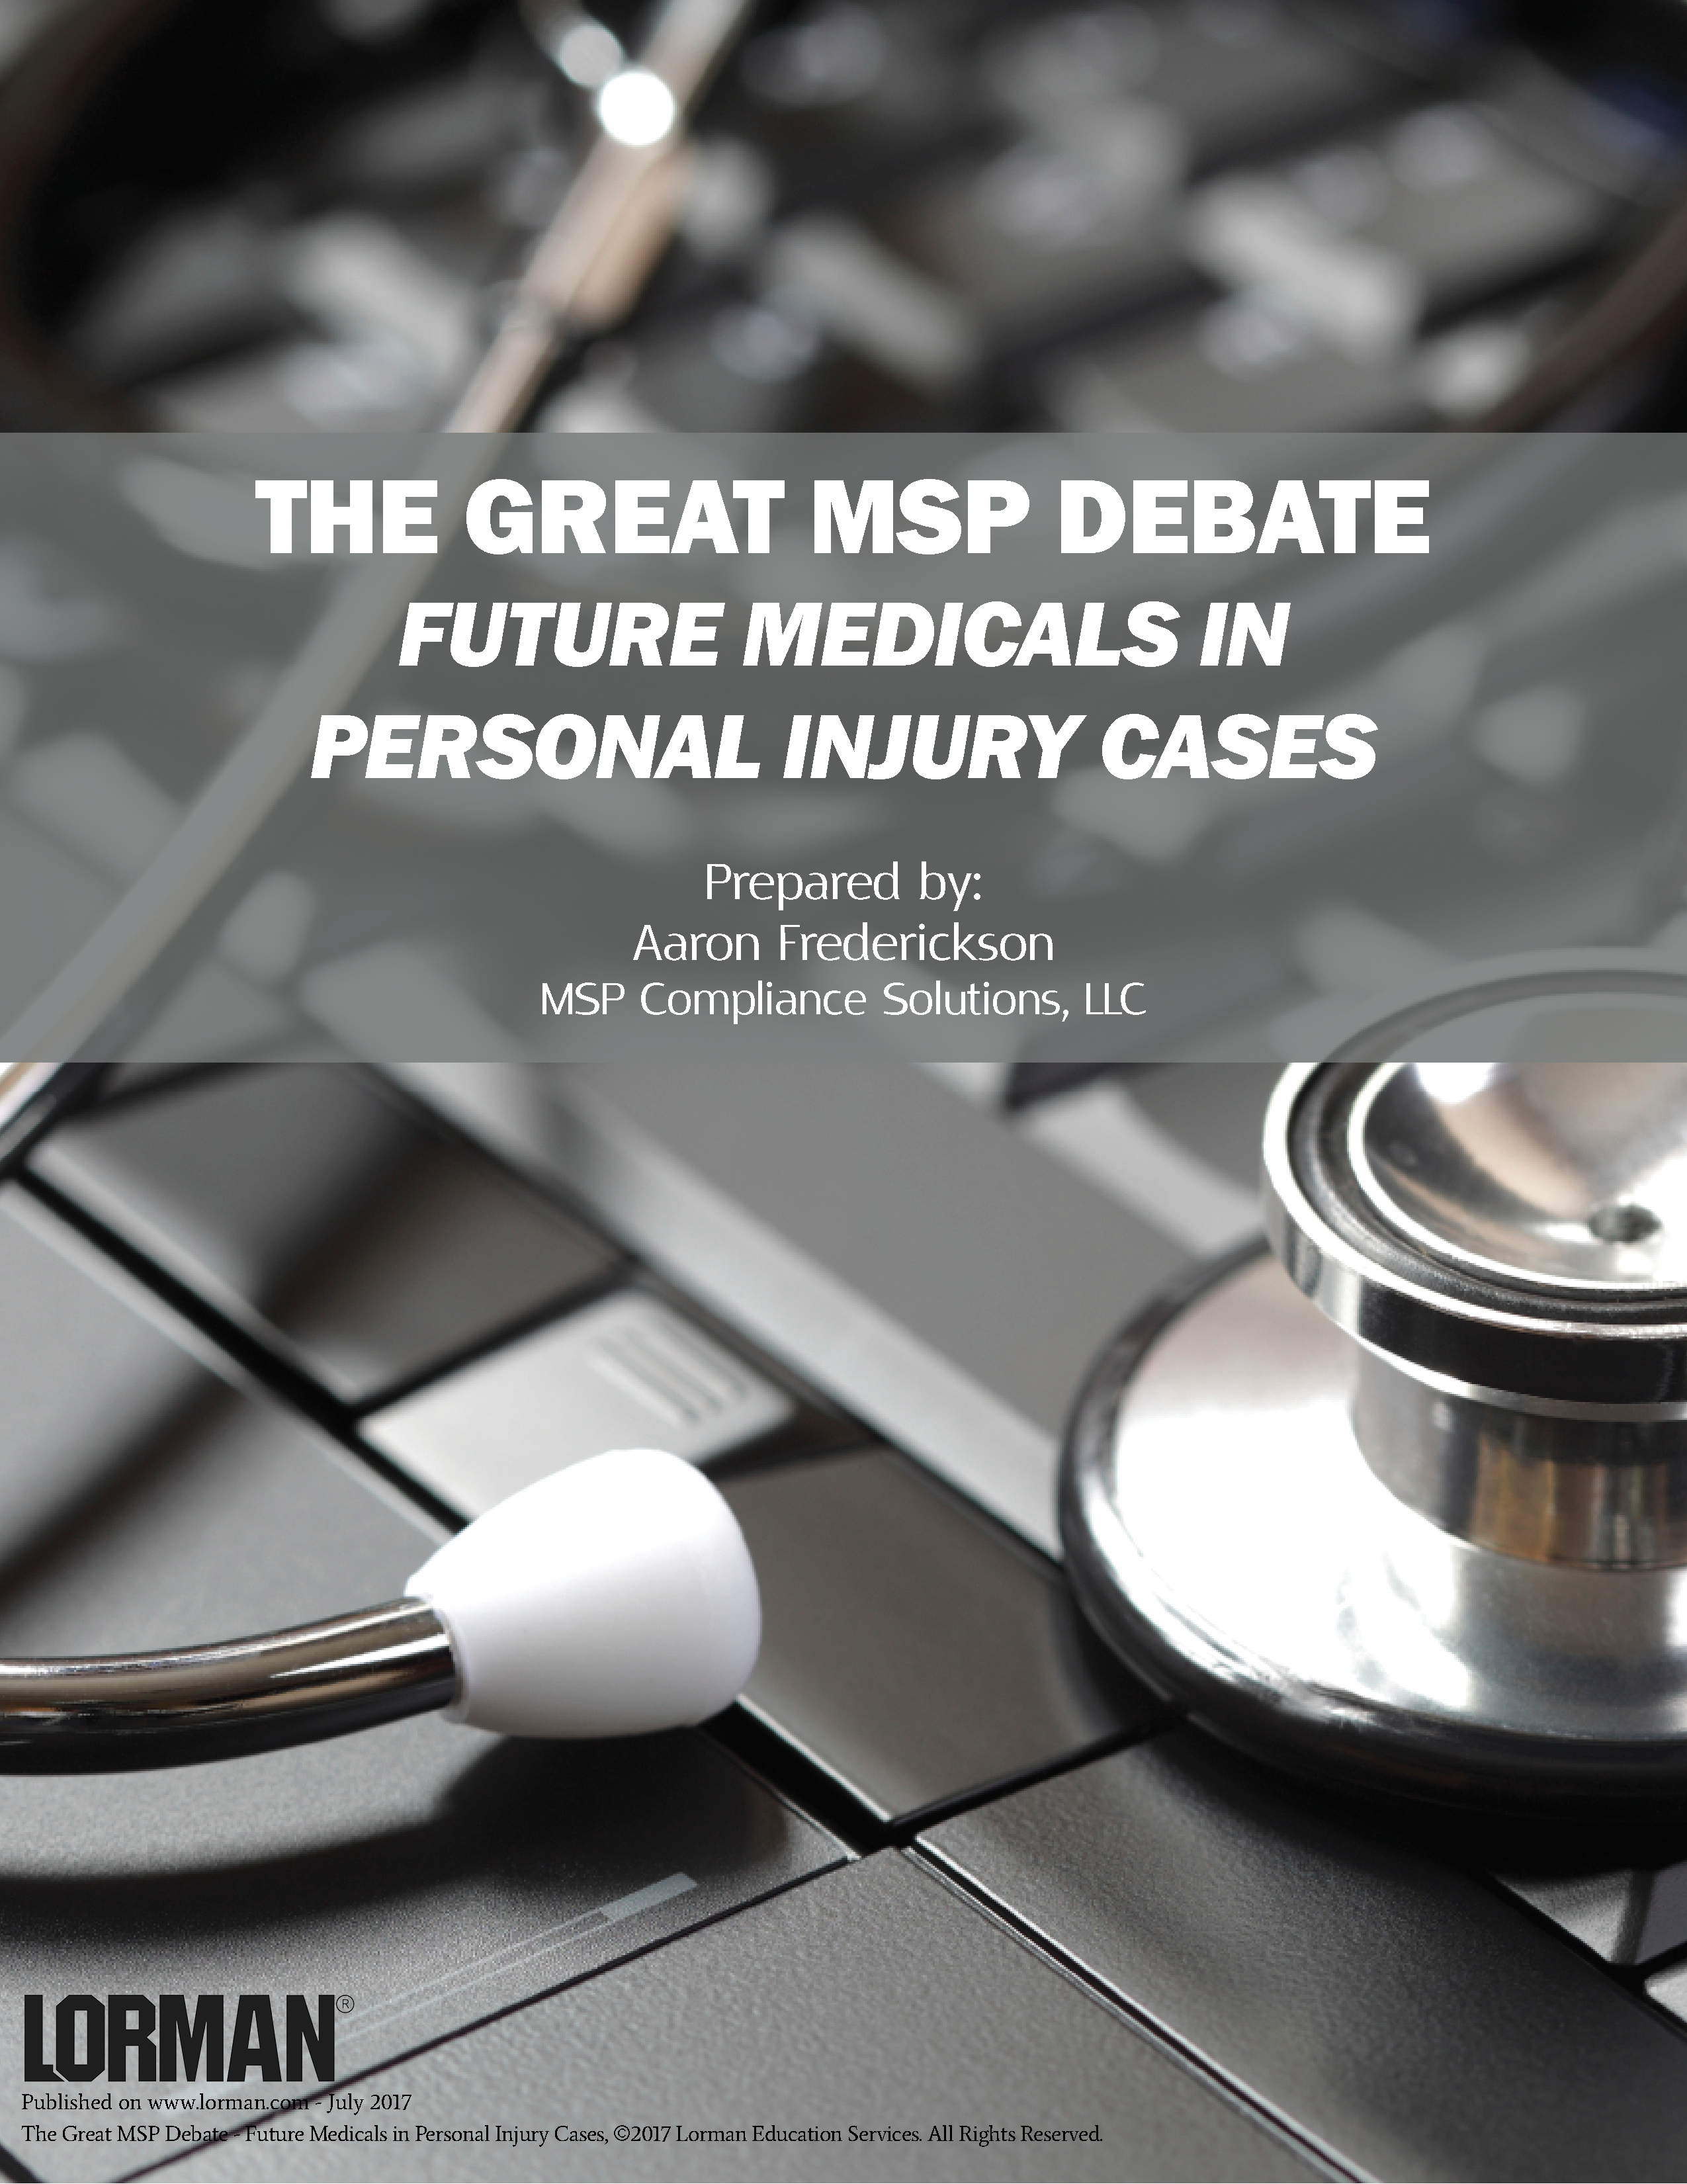 The Great MSP Debate - Future Medicals in Personal Injury Cases